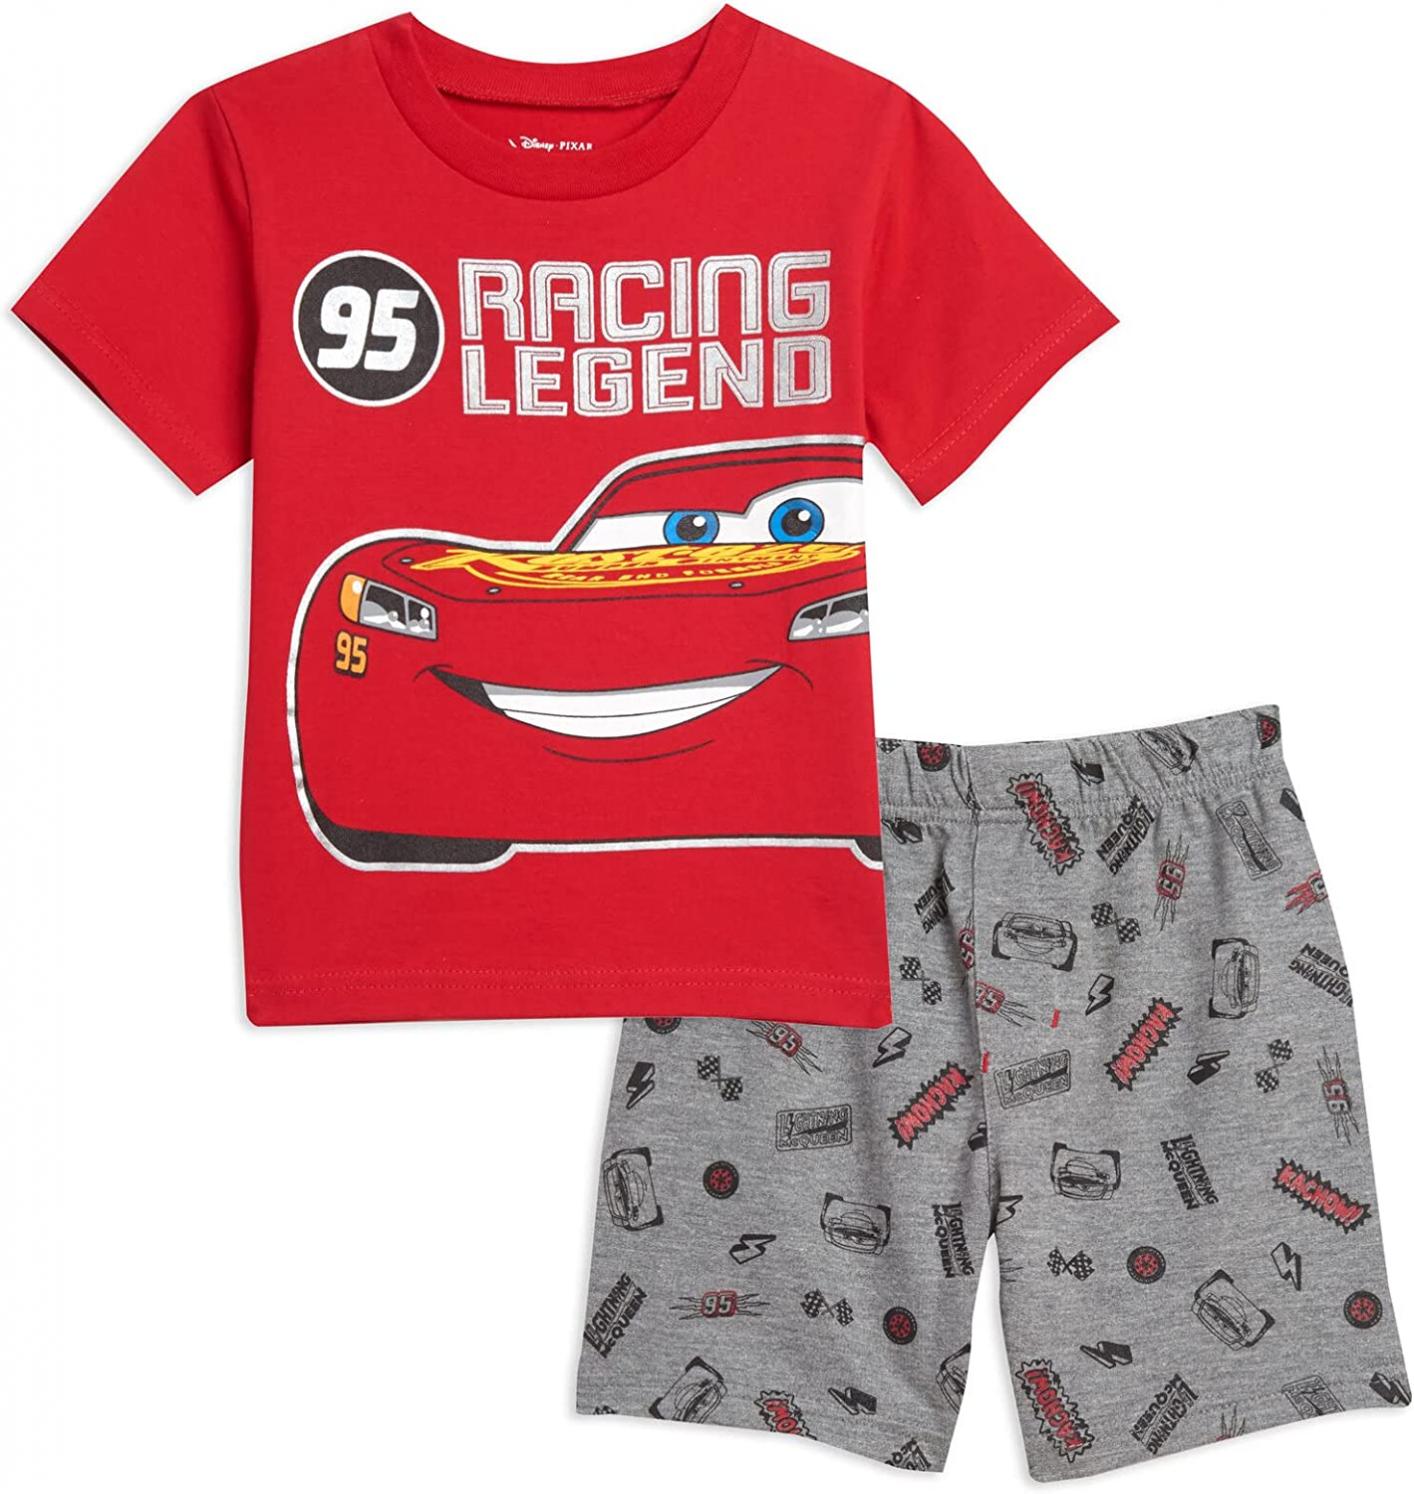 Disney Pixar Cars Lightning McQueen T-Shirt and French Terry Shorts Outfit Set Toddler to Little Kid